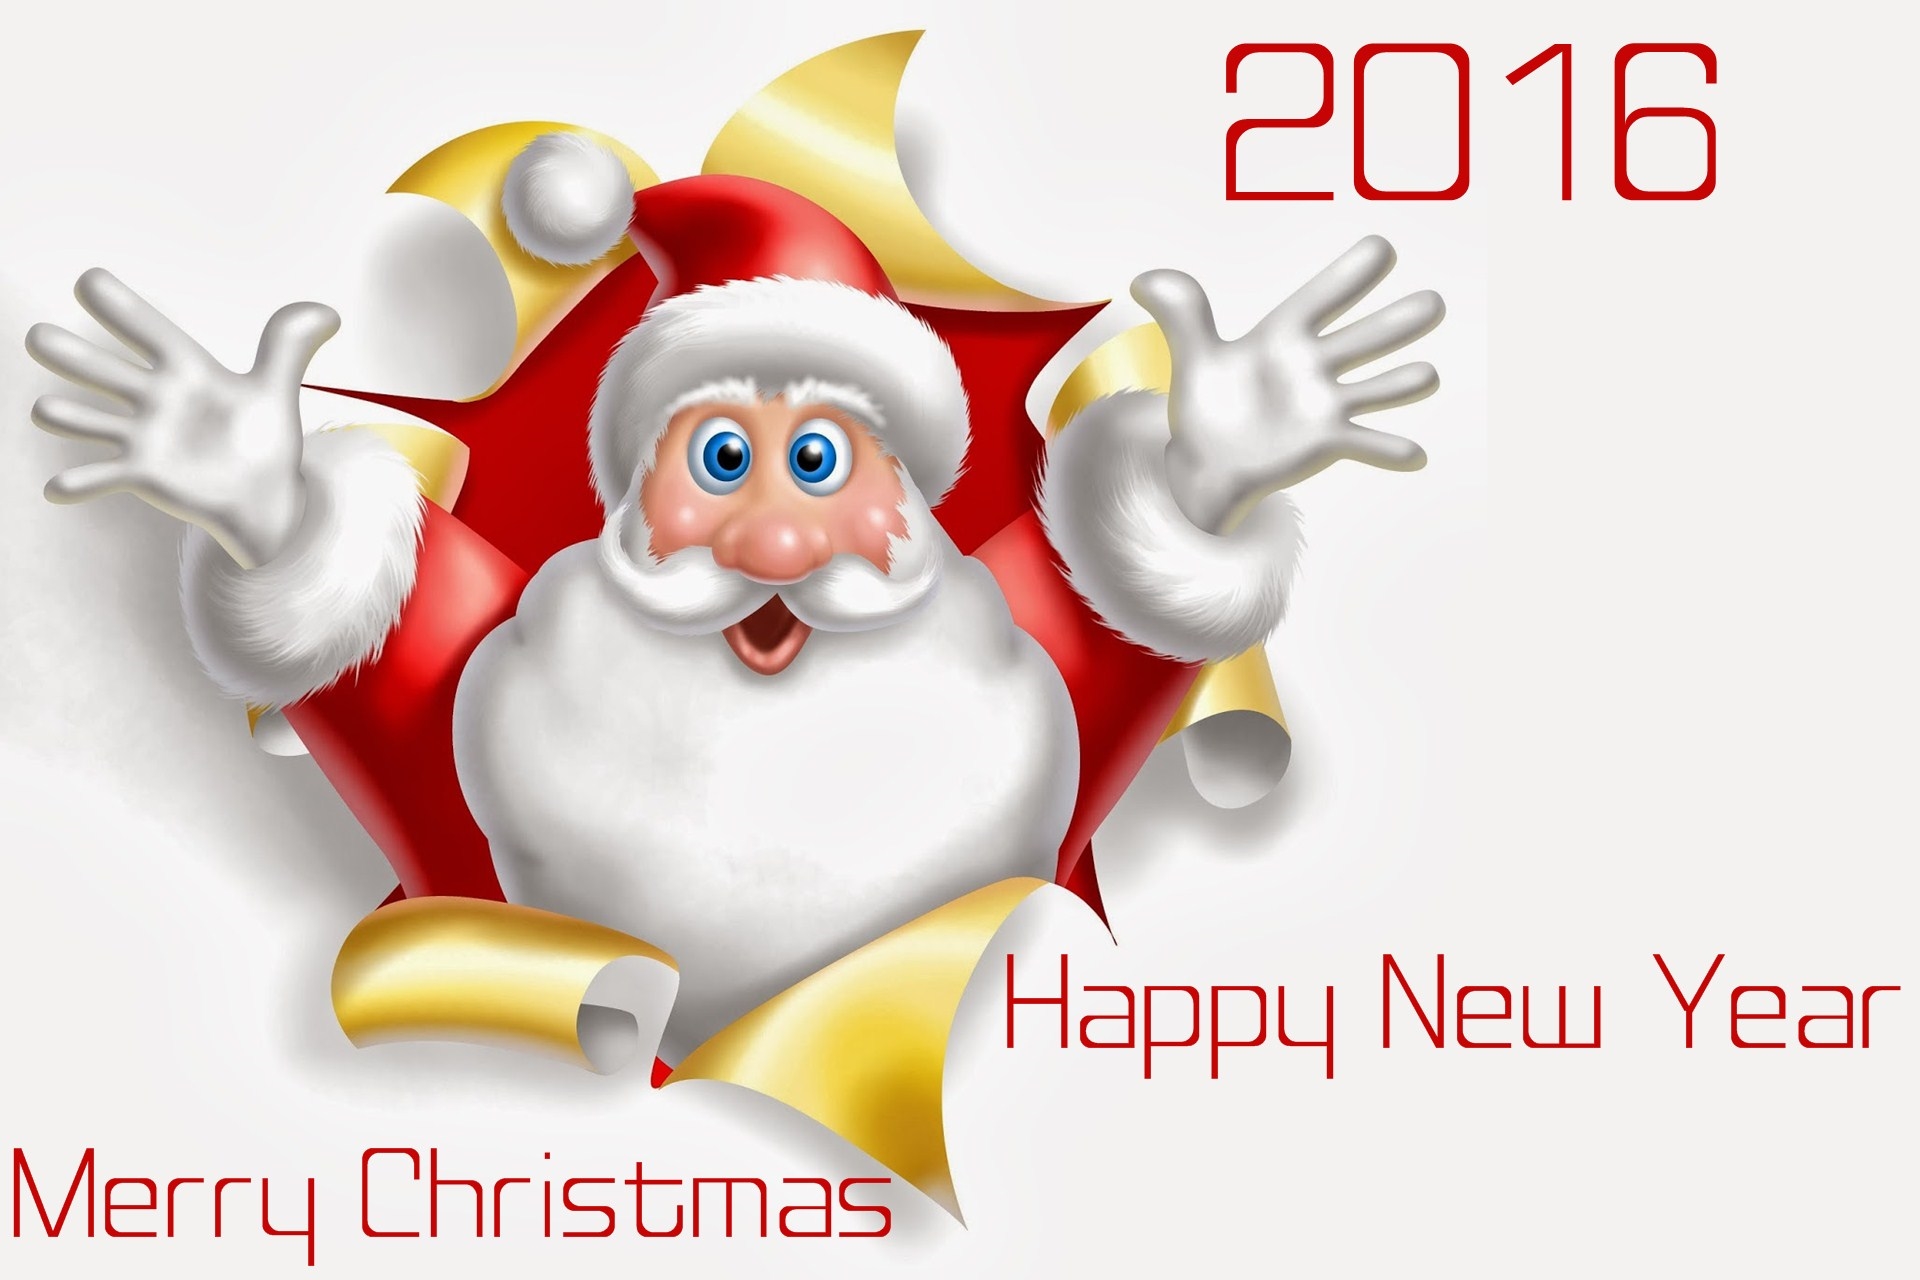 clipart merry christmas and happy new year - photo #39